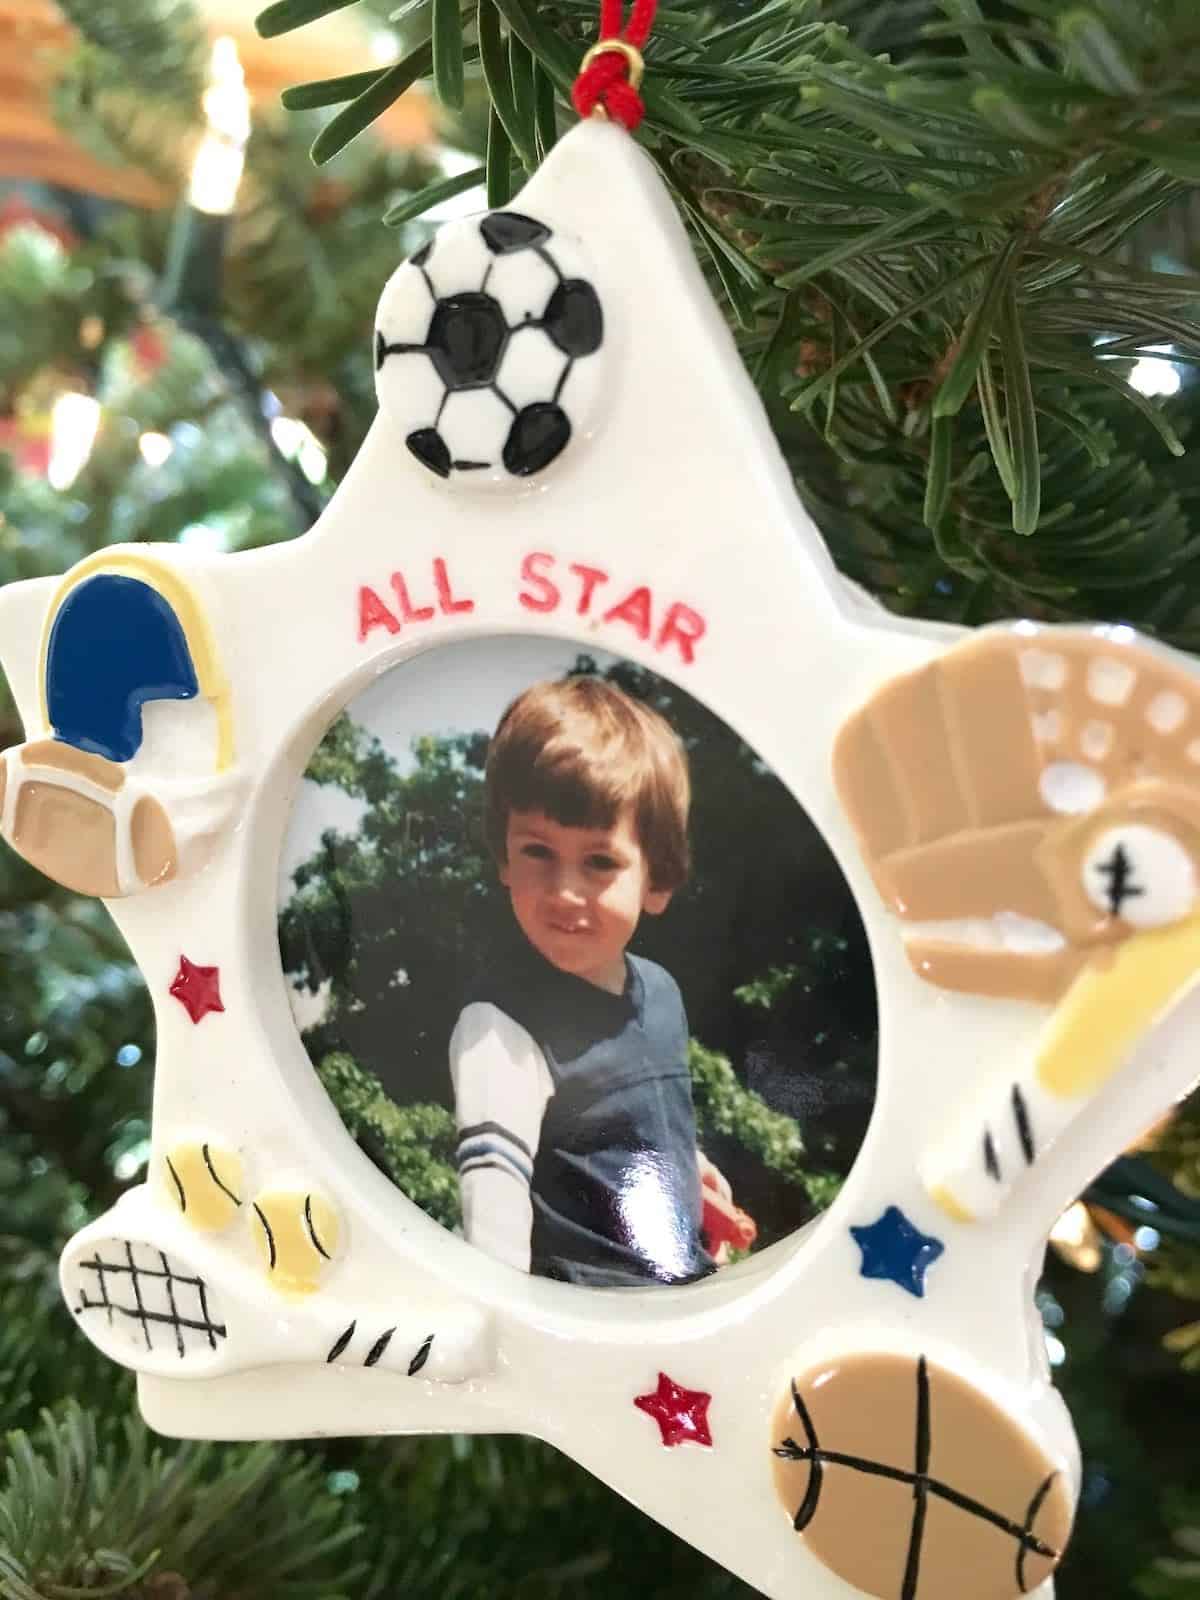 Only gratitude for this Xmas ornament of Will.